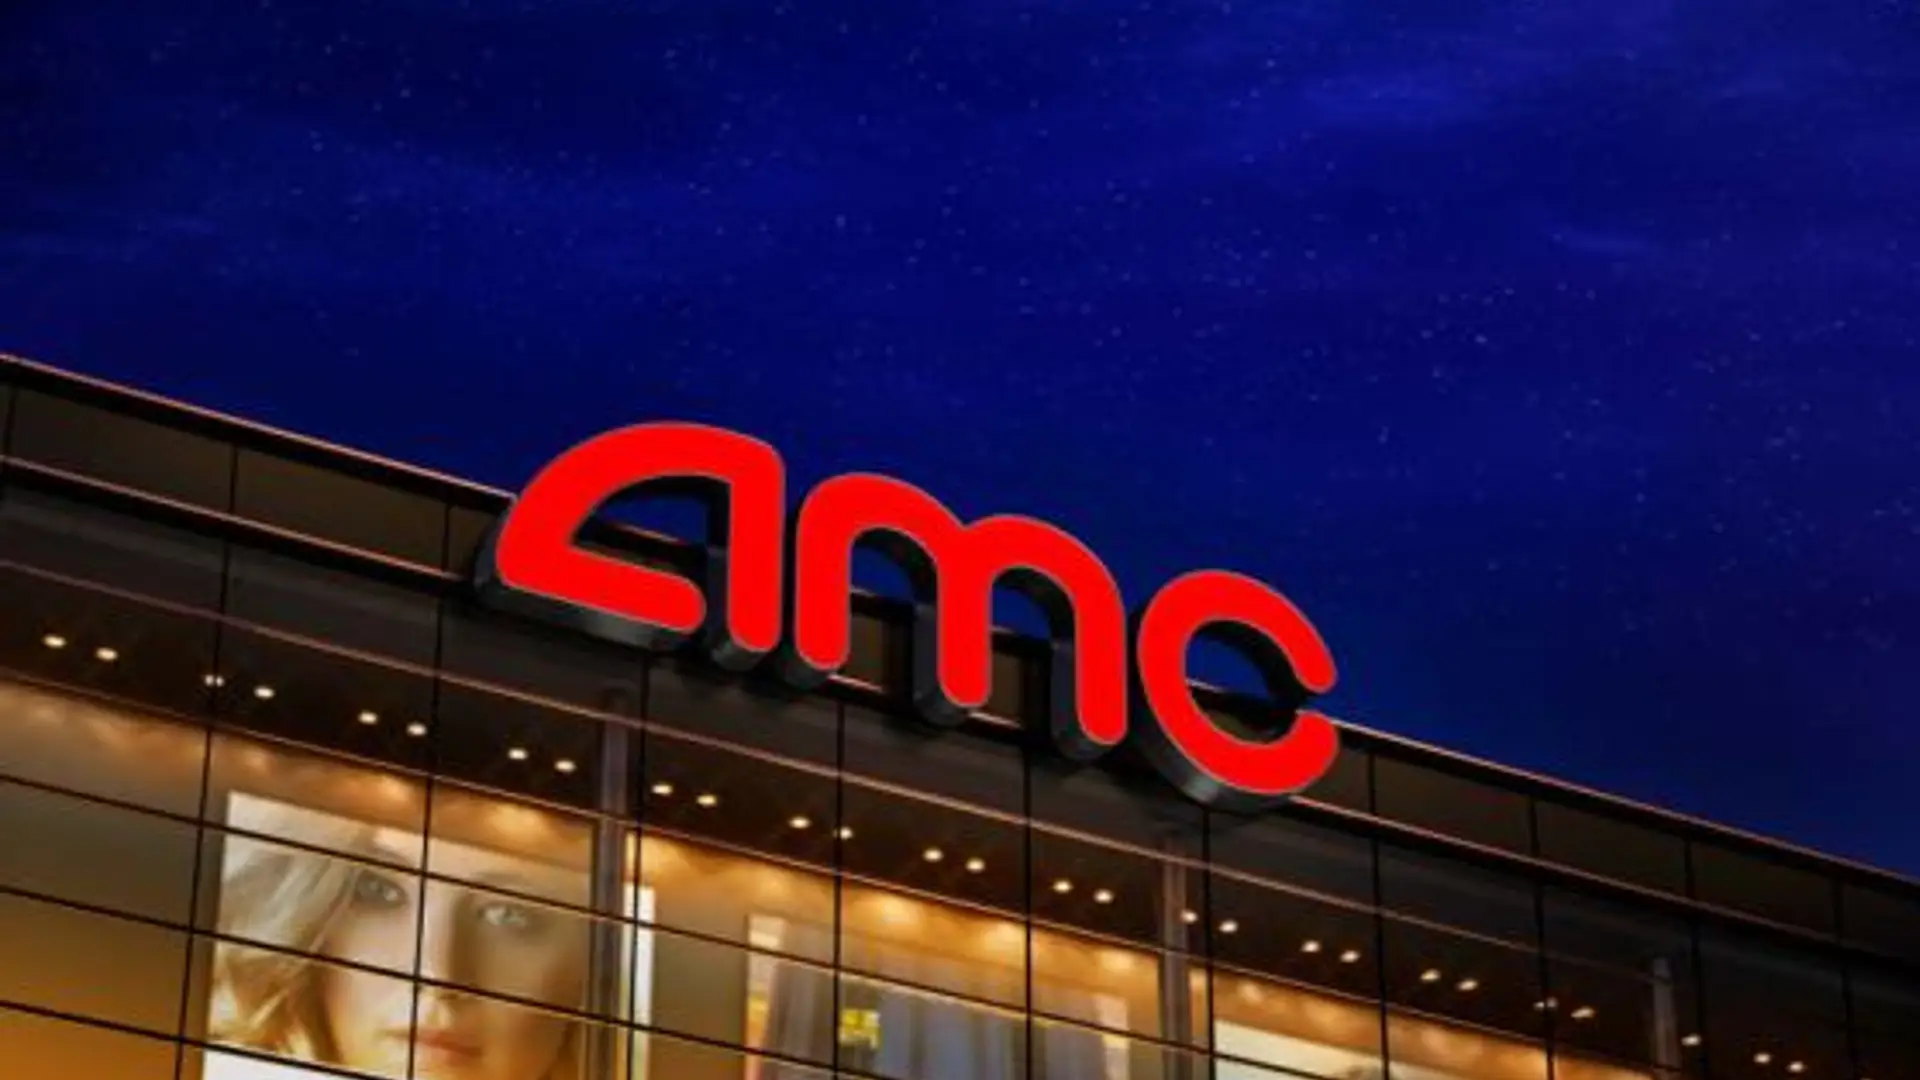 AMC Theaters Abandons Tiered Pricing for Preferred Seats: New Seating Concept in the Works